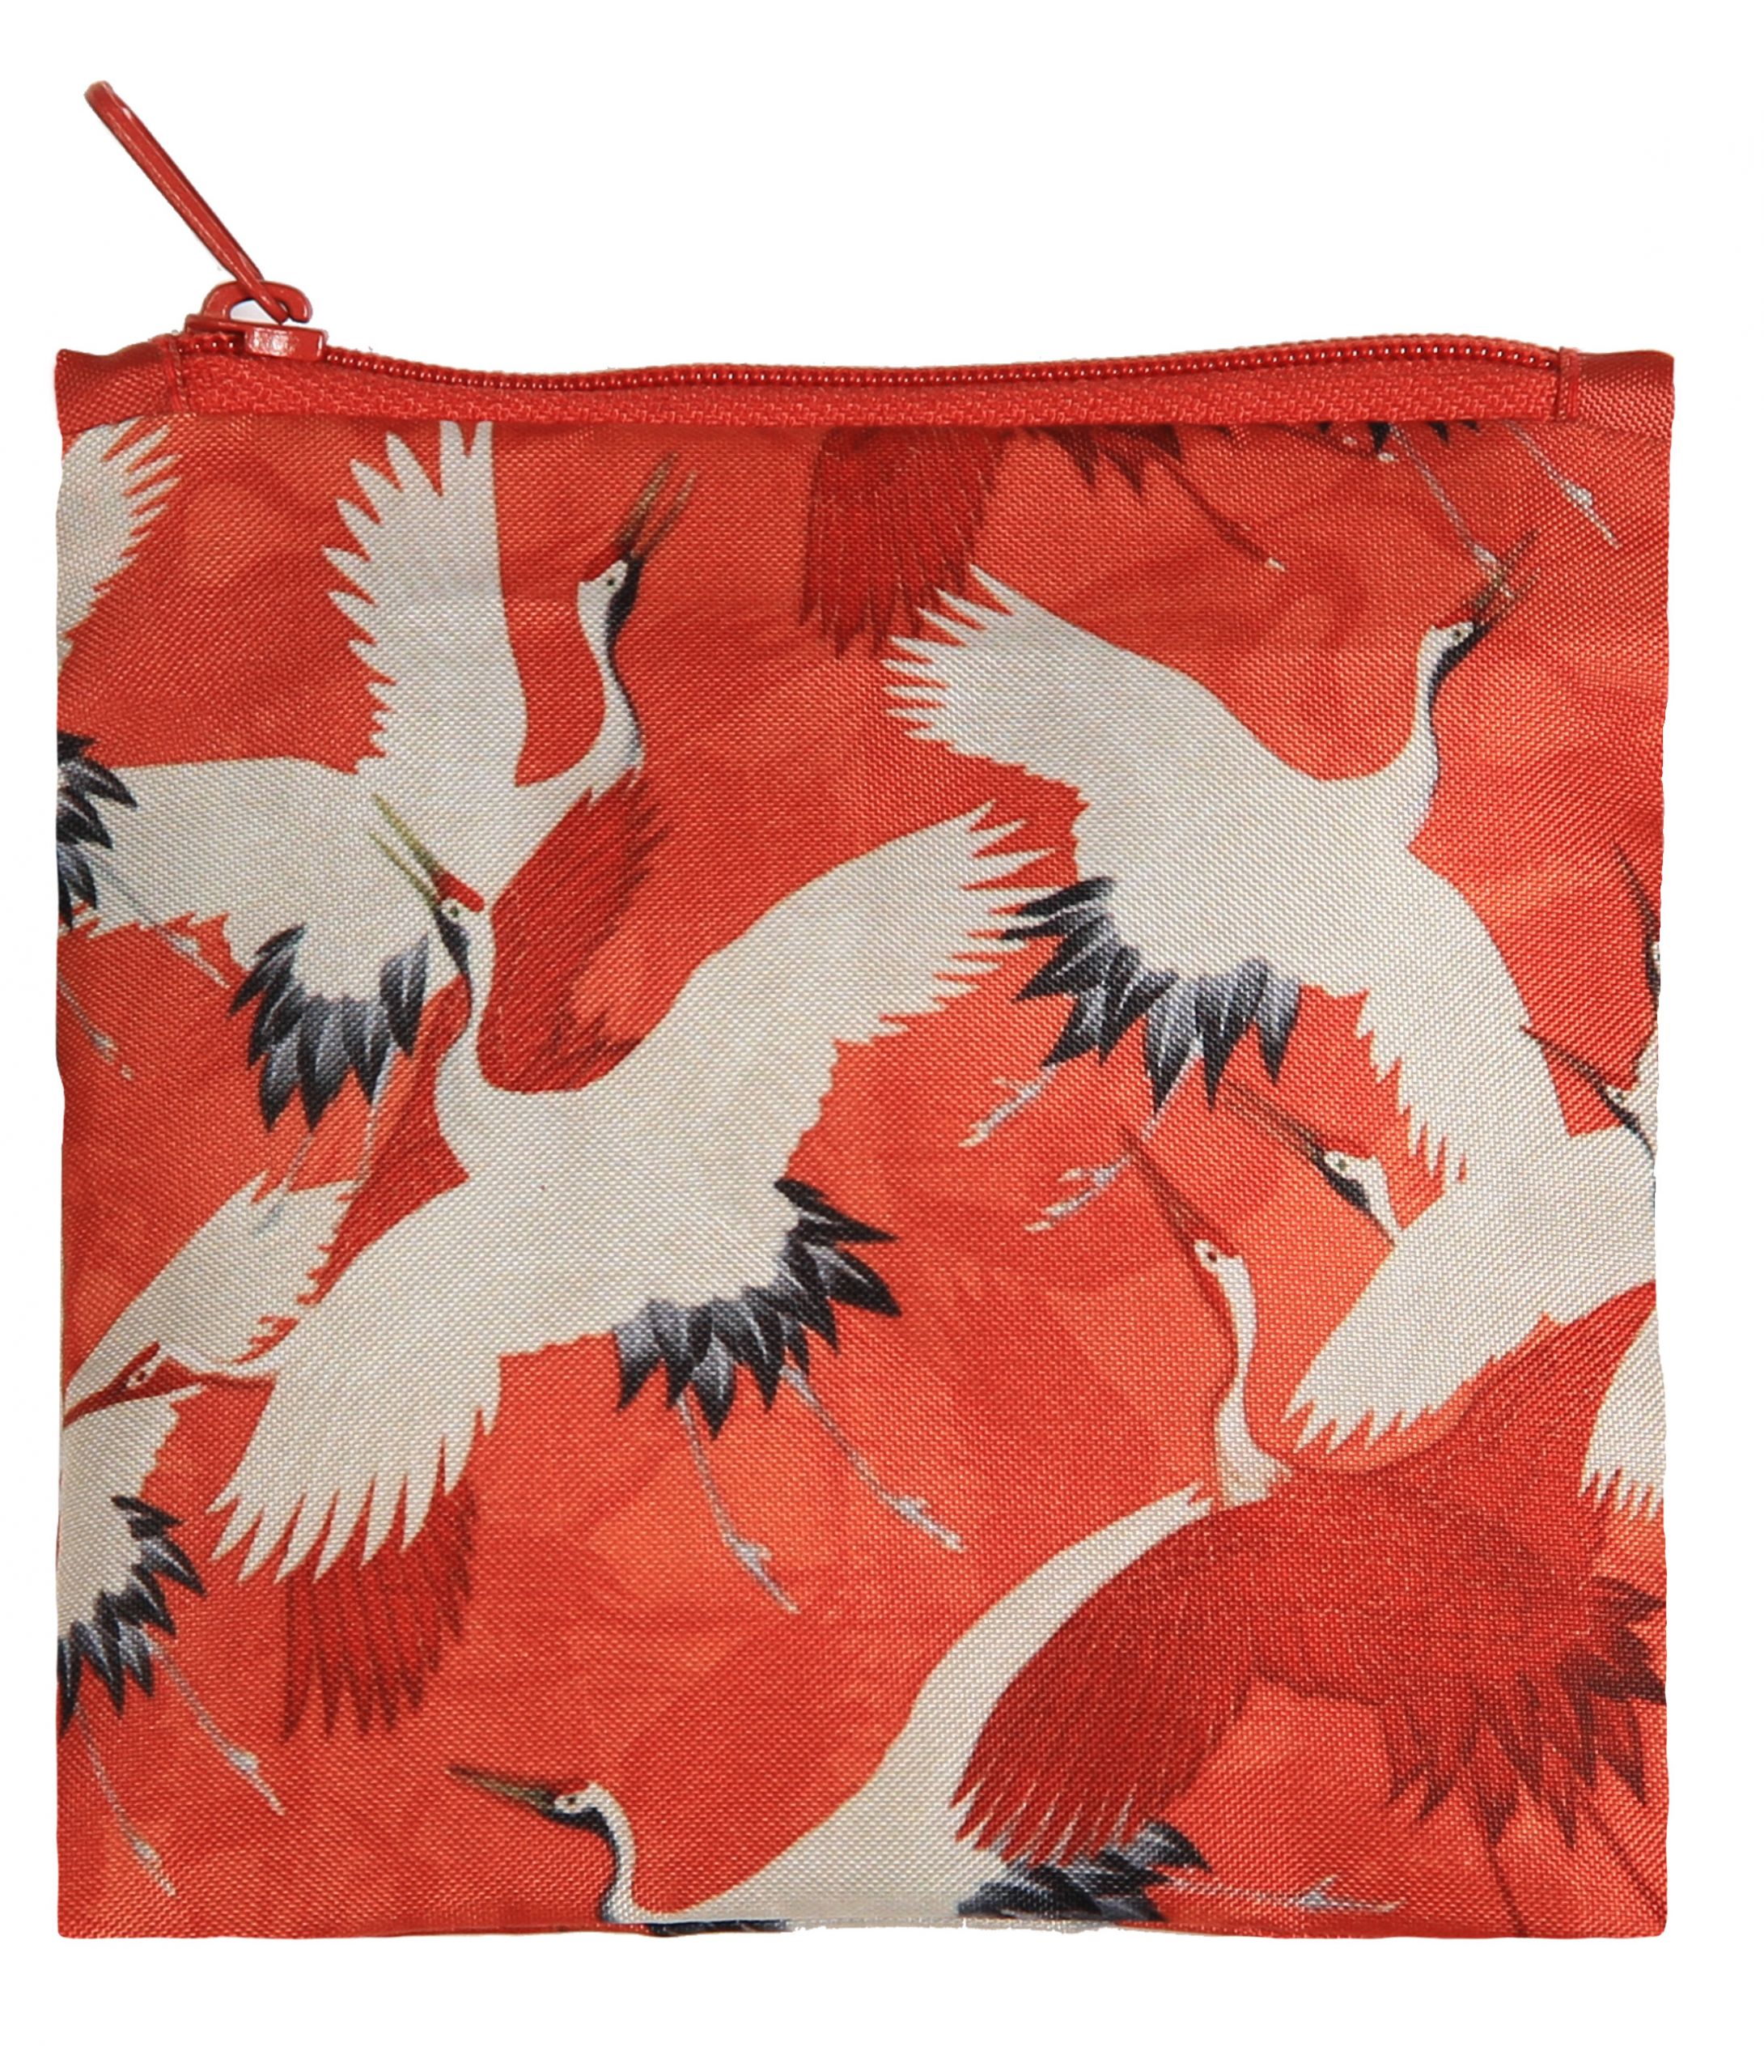 Loqi tote museum collection - white and red cranes